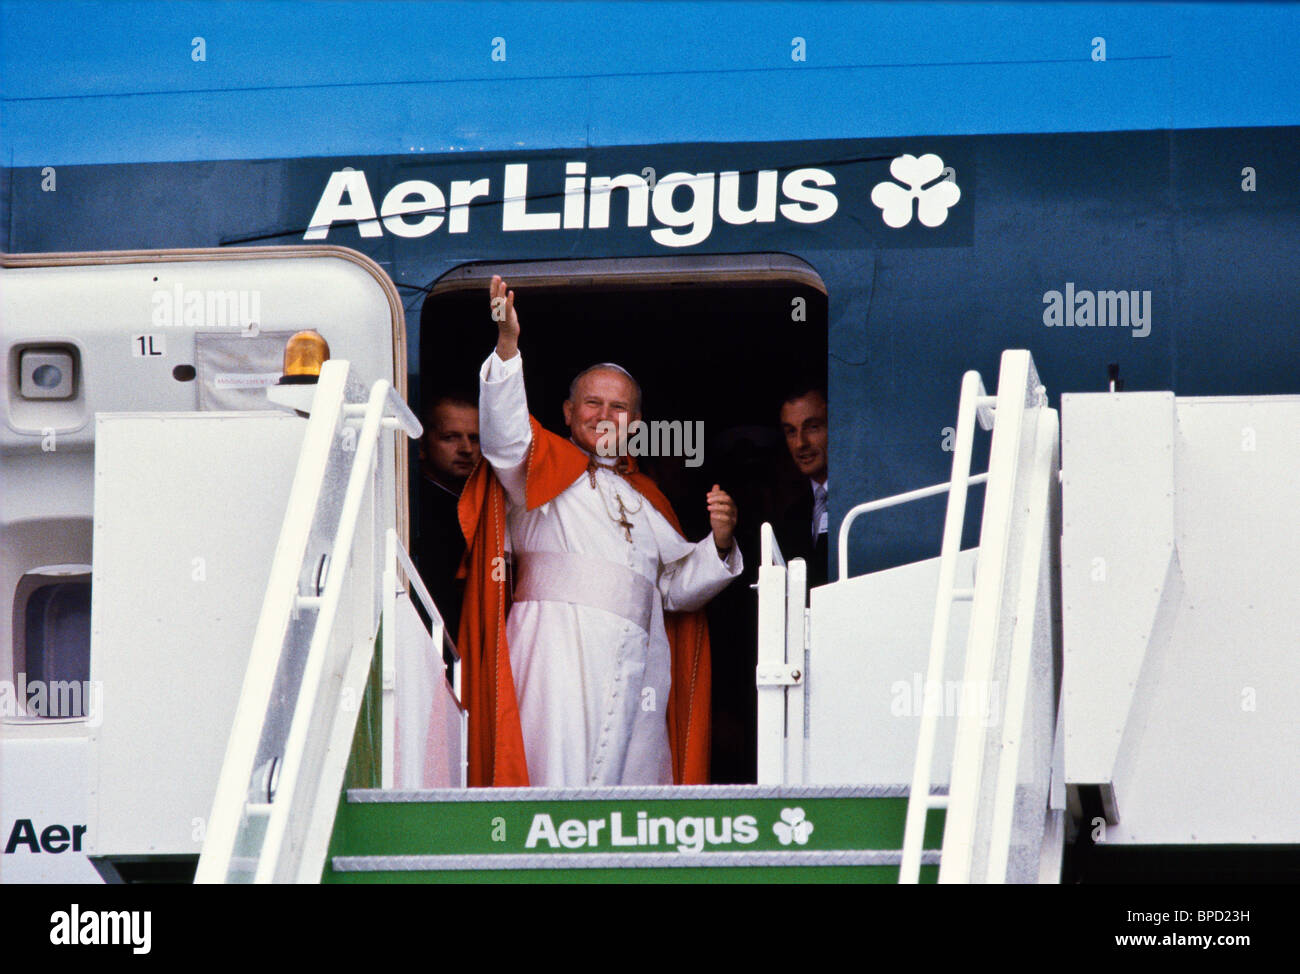 Pope John Paul II waves as he boards Aer Lingus flight at Shannon Airport following his visit to Ireland Stock Photo